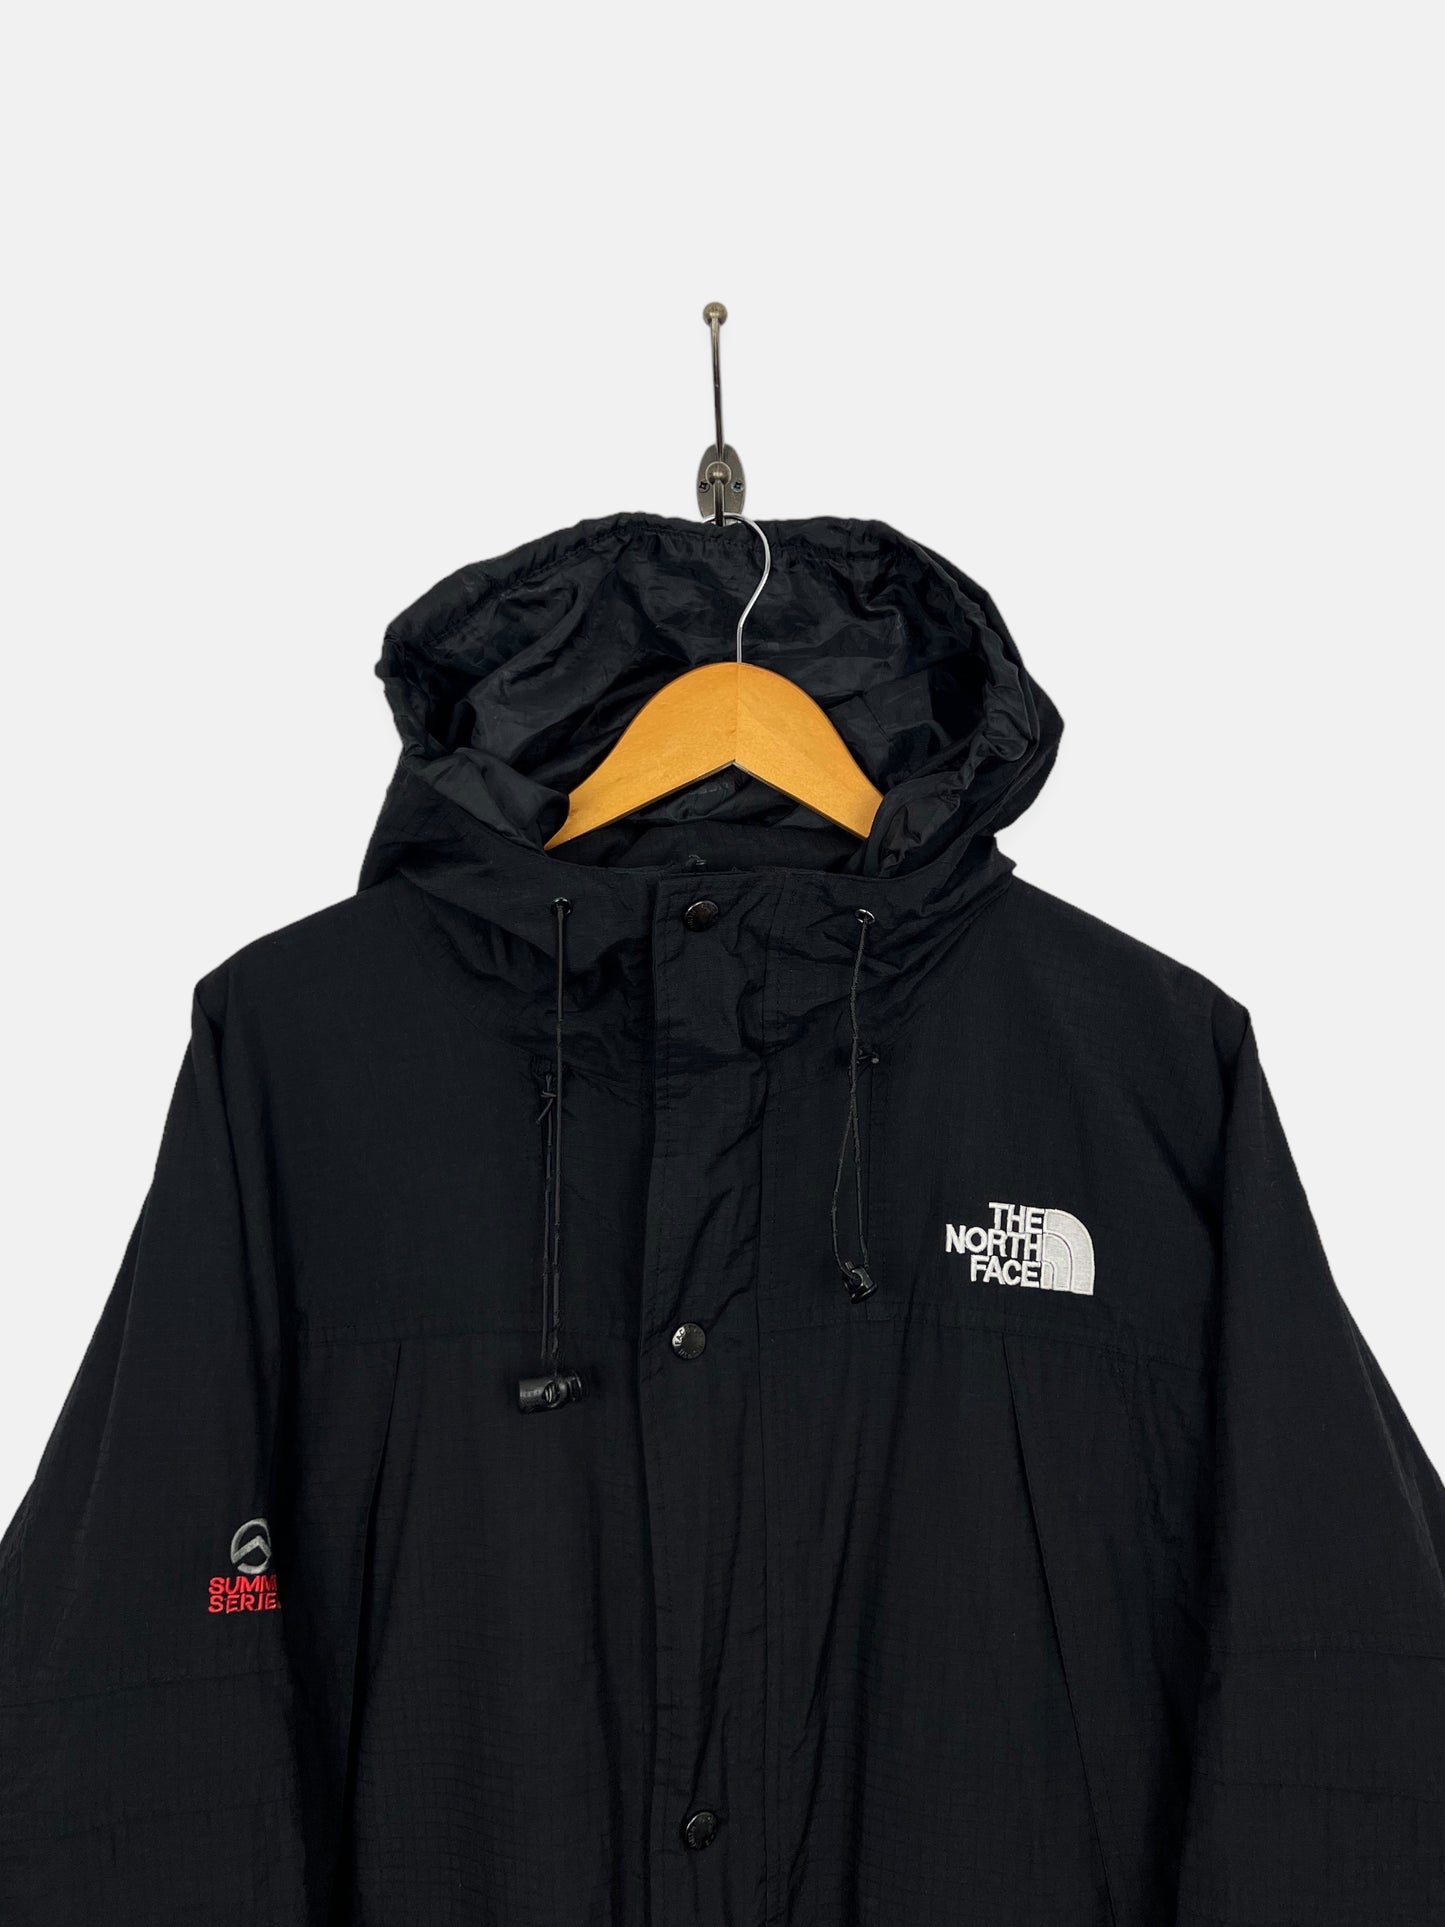 The North Face Gore-Tex Summit Series Embroidered Vintage Jacket Size XL